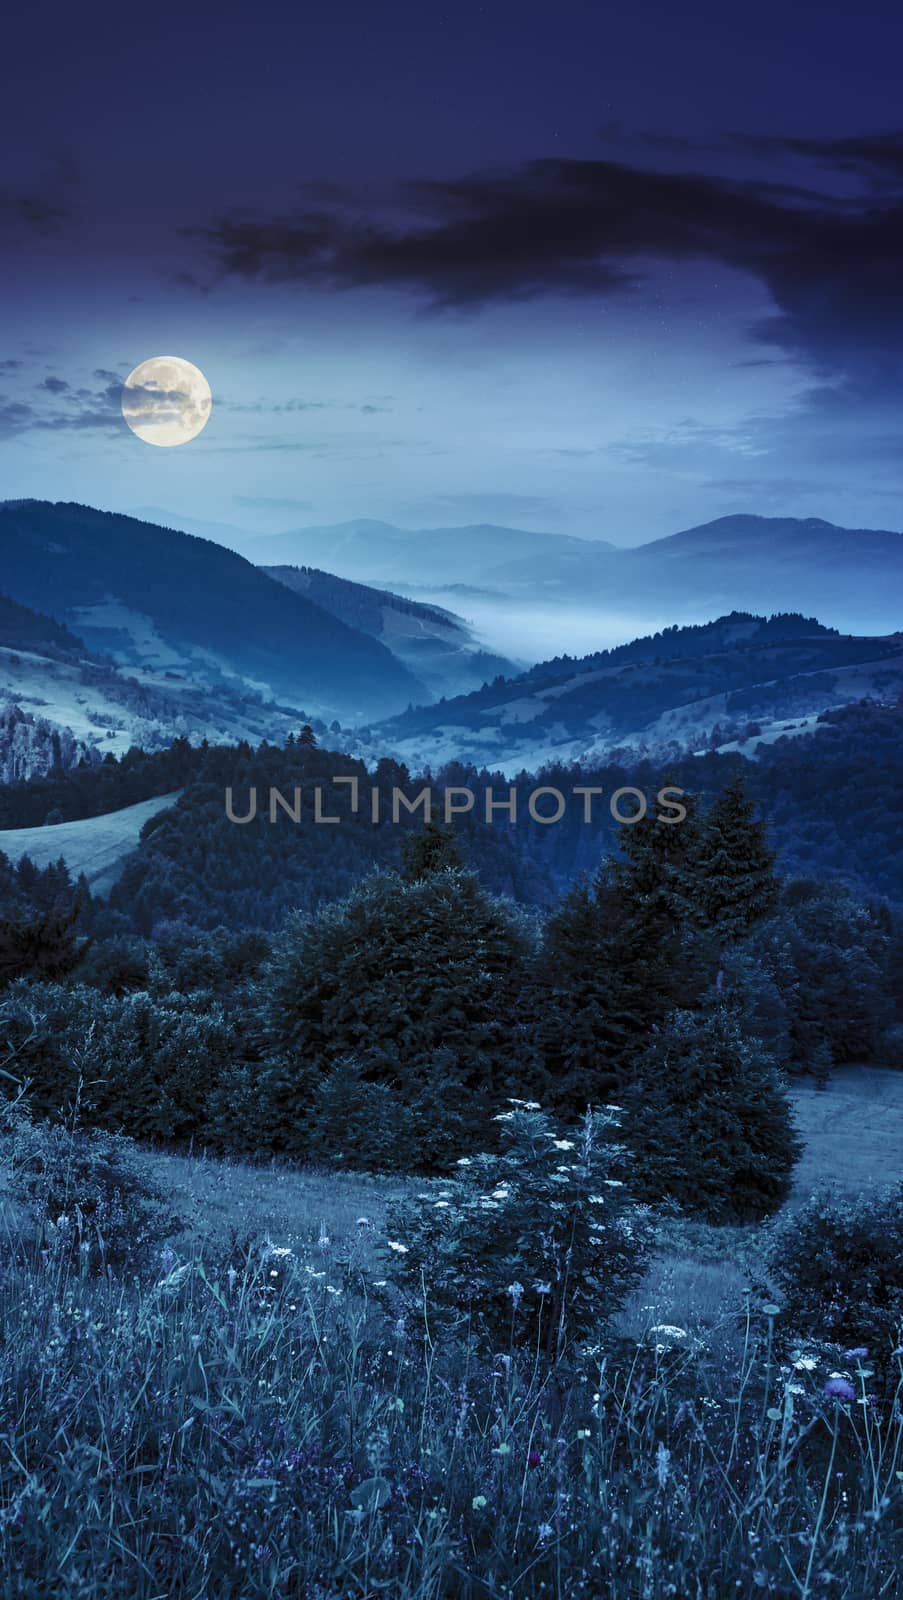 summer mountain landscape. fog from conifer forest surrounds the mountain top at night in full moon light